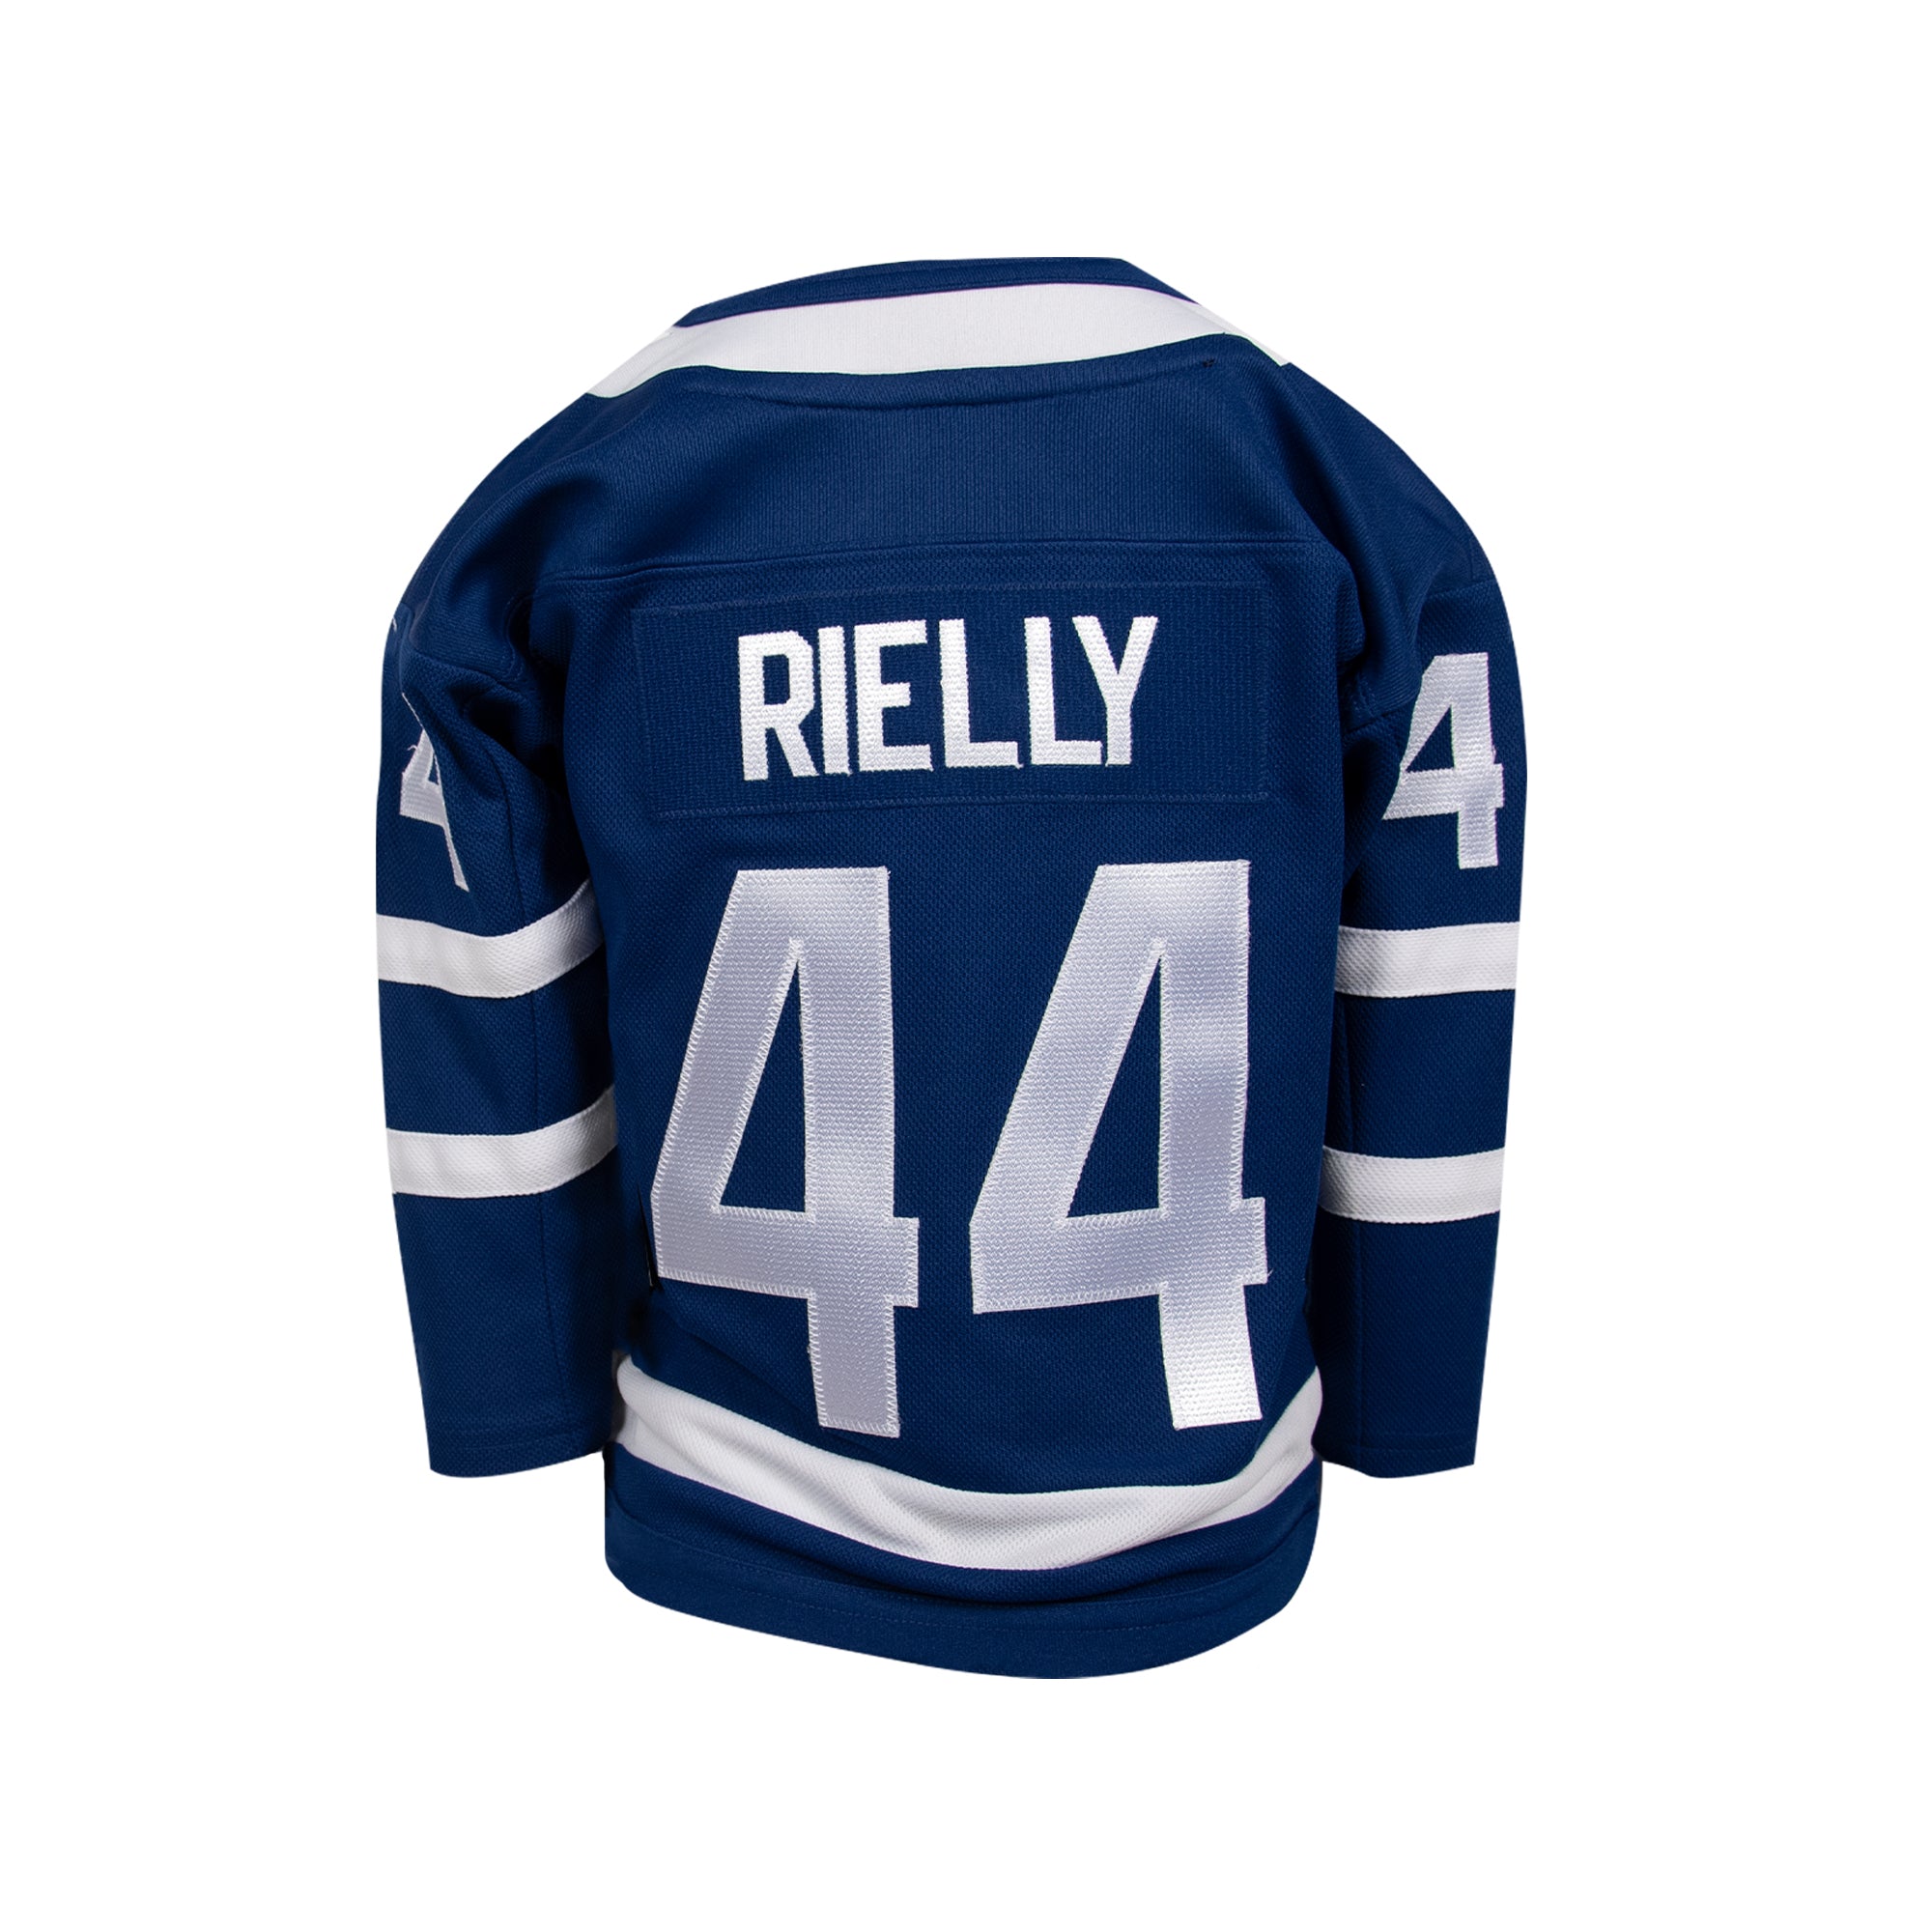 Maple Leafs Kids Home Jersey - Rielly